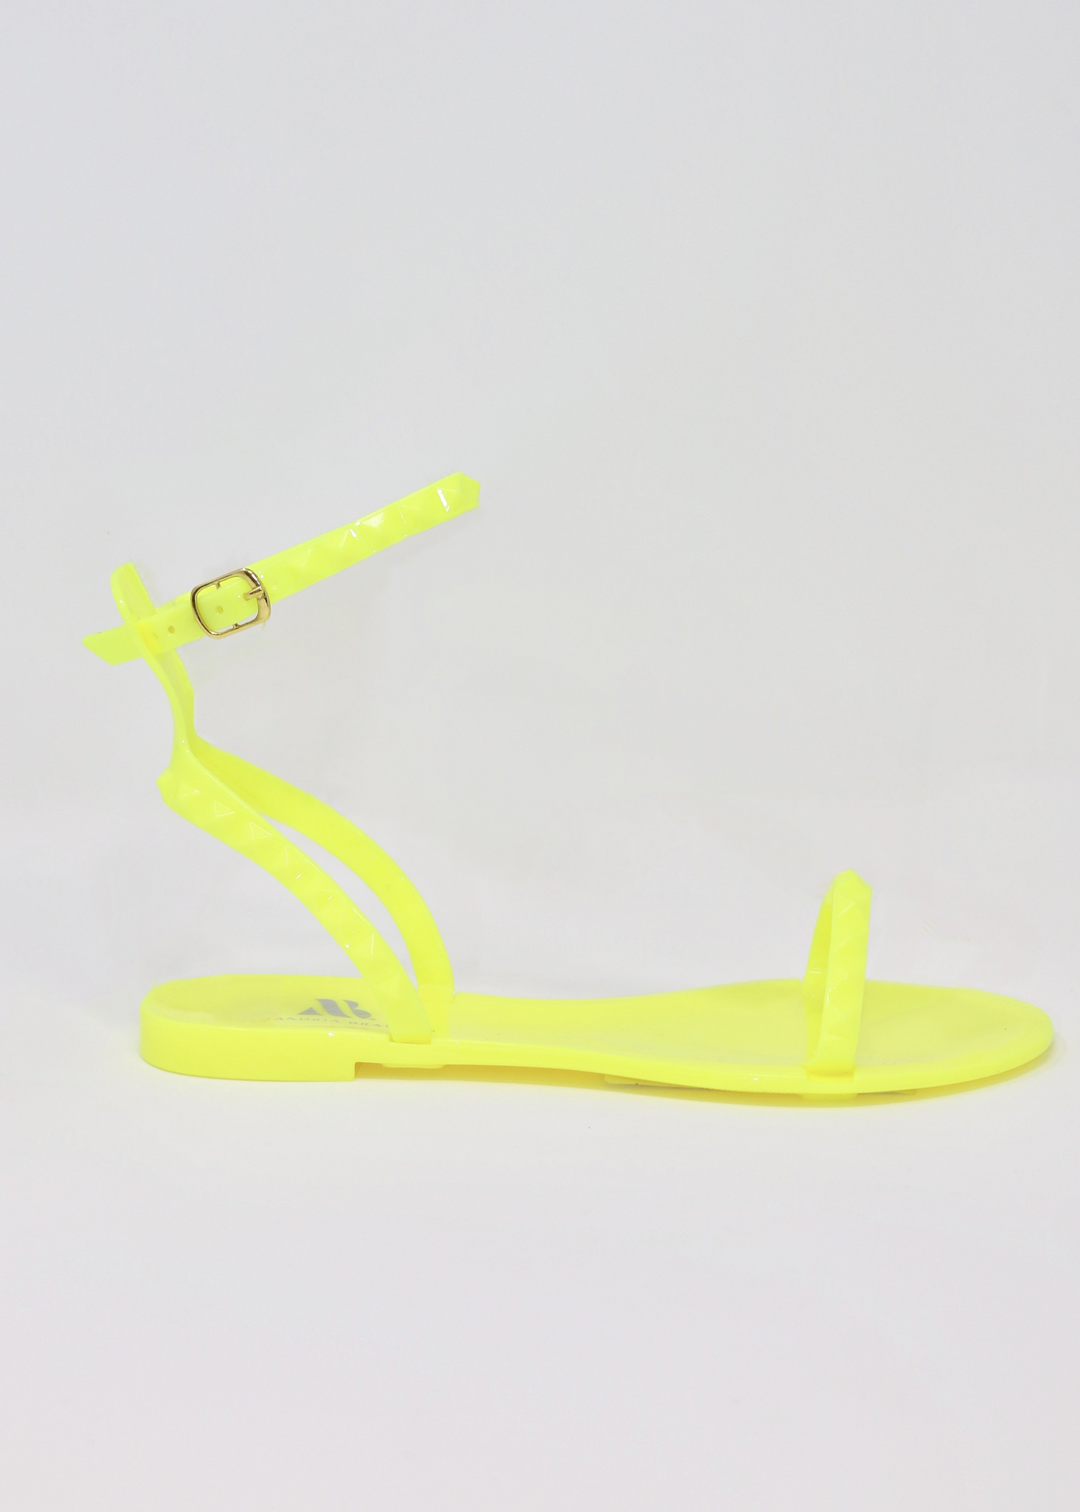 Limited Edition Aria Sandals in Neon Yellow. Side View